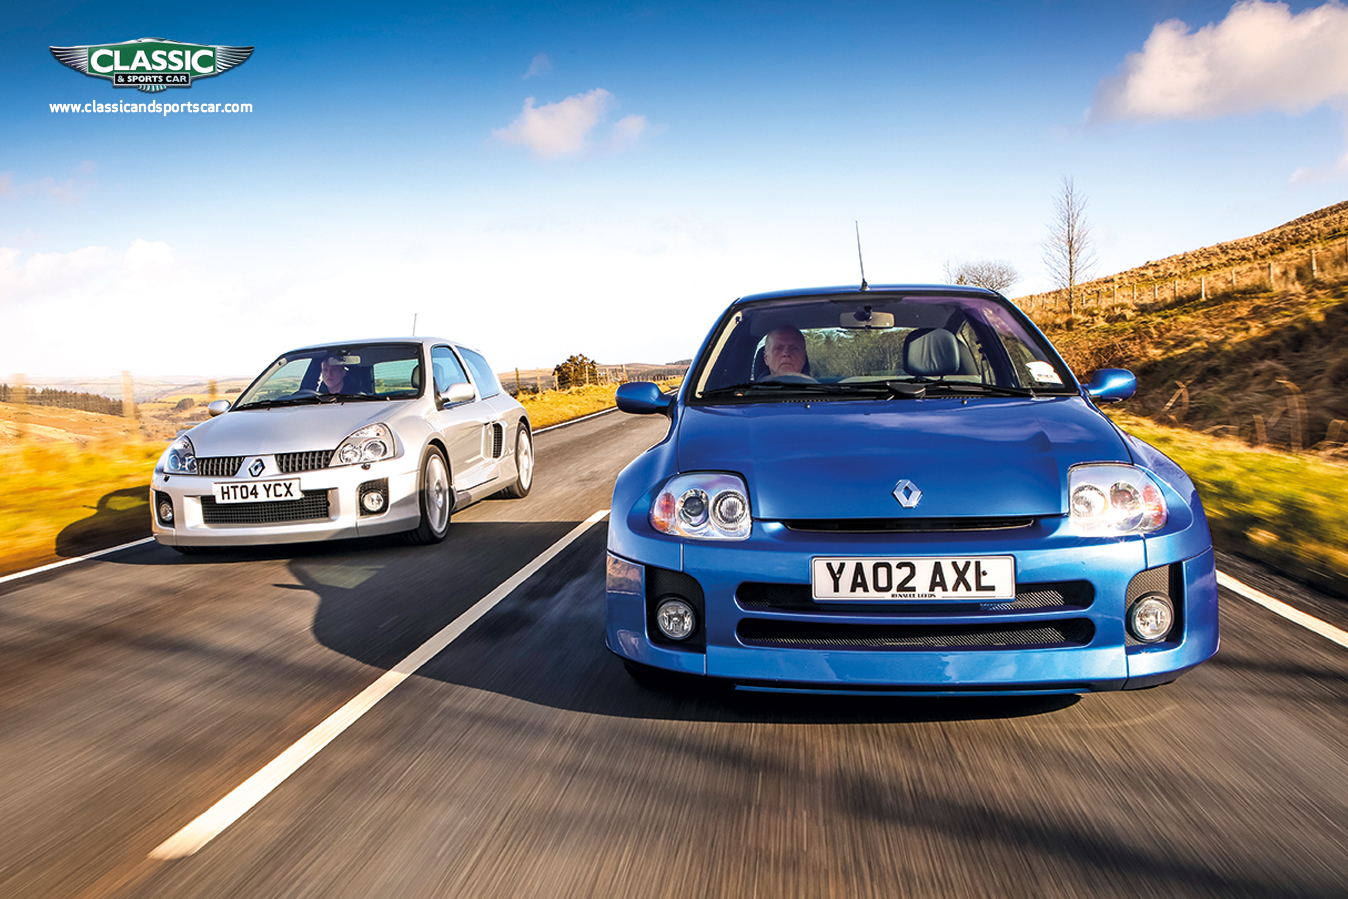 Renault_Clio_V6_wallpaper_Classic_and_sports_car_July_2018.jpg